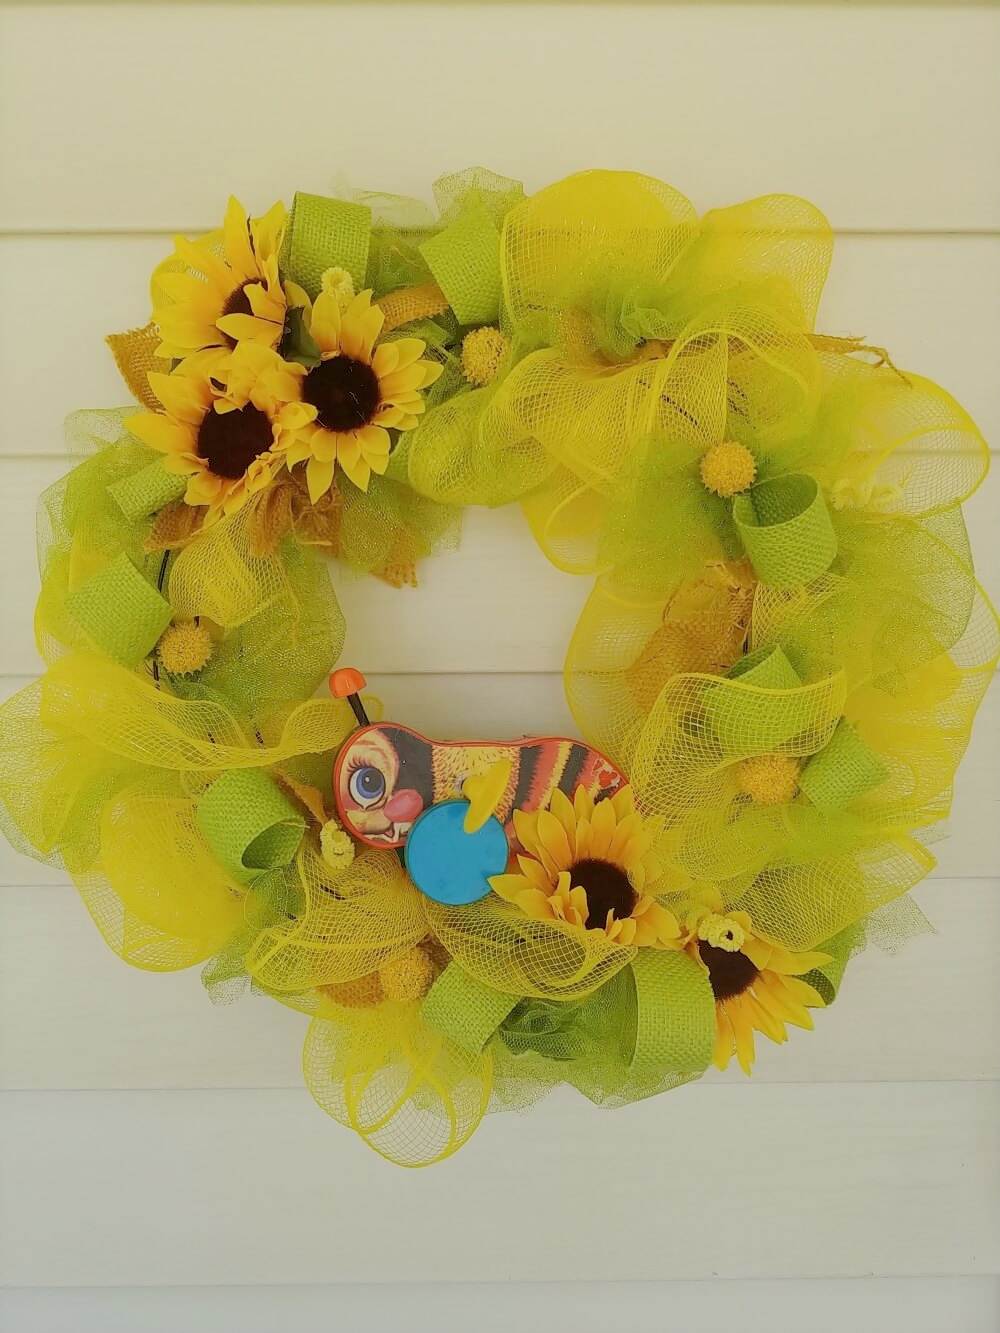 Vintage Fisher-Price Bumble Bee Wreath